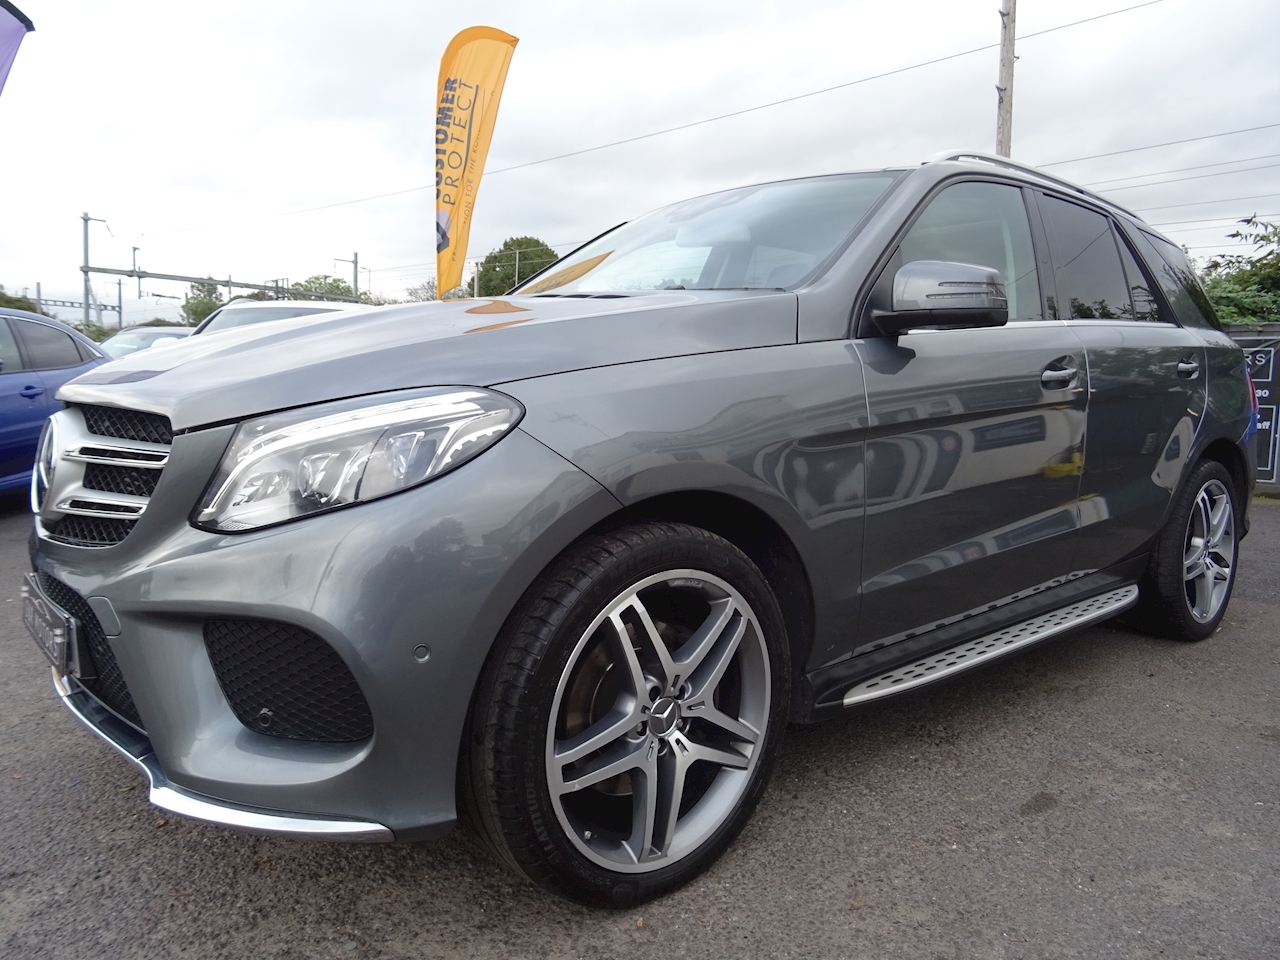 3.0 GLE350d V6 AMG Line (Premium) SUV 5dr Diesel G-Tronic 4MATIC (s/s) (258 ps)